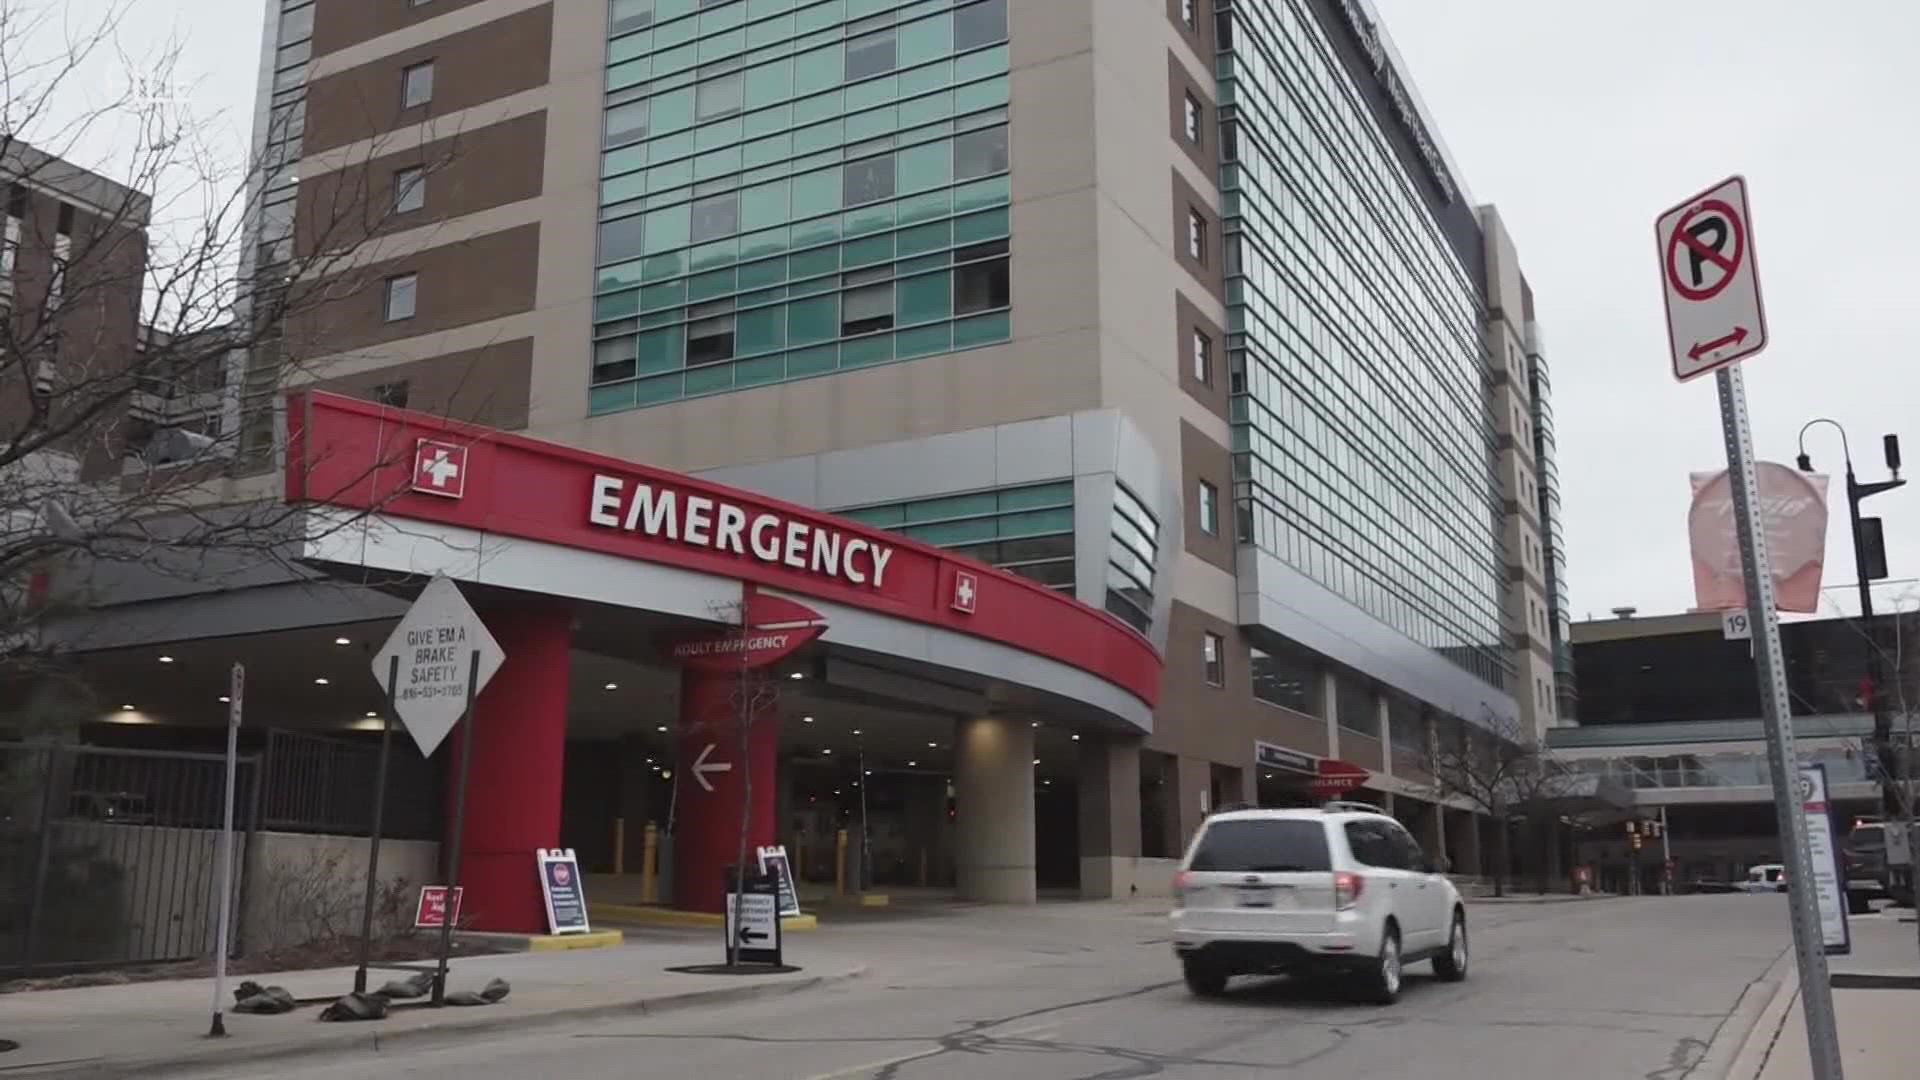 Federal medical staff already helping at Spectrum Health in Grand Rapids will stay for an additional 30 days to help teams strained by COVID-19.